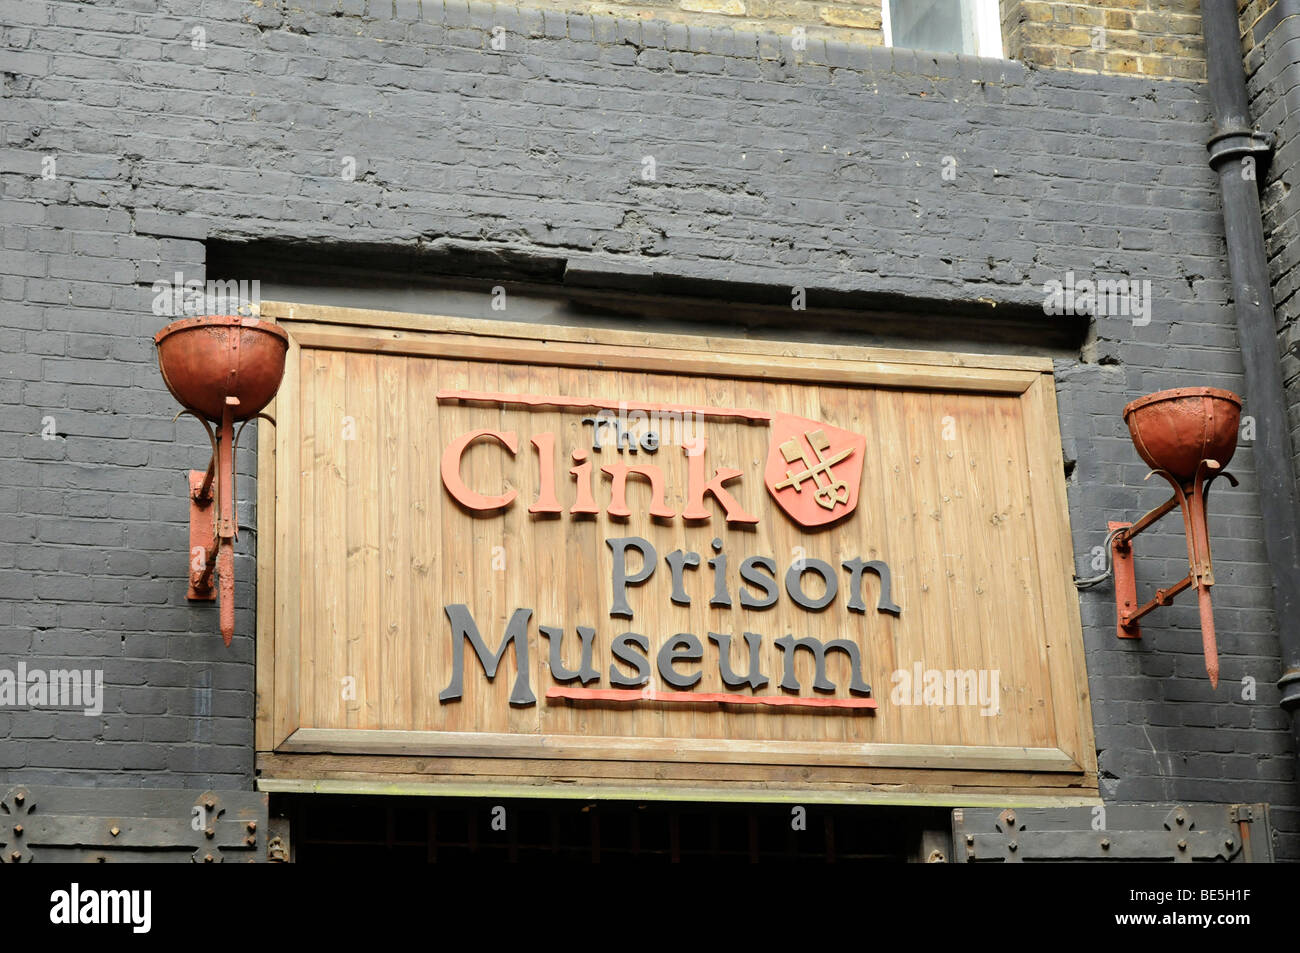 The Clink Prison Museum, London. Stock Photo